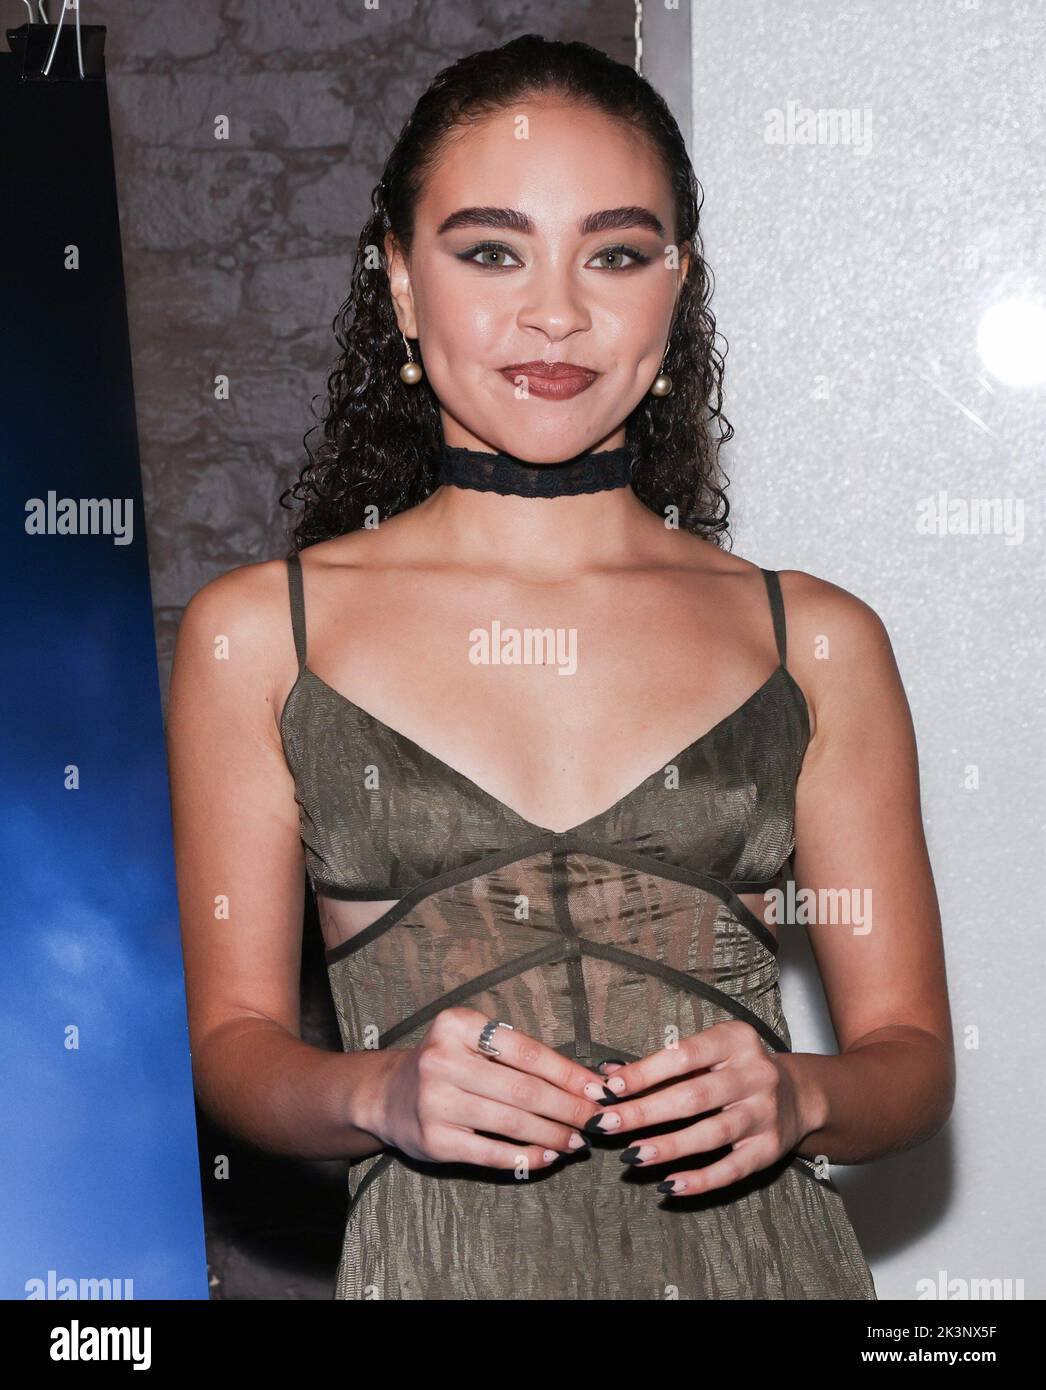 New York, NY, USA. 27th Sep, 2022. Bailey Bass at arrivals for AMC ANNE RICE'S INTERVIEW WITH THE VAMPIRE Series Premiere, IFC Center, New York, NY September 27, 2022. Credit: CJ Rivera/Everett Collection/Alamy Live News Stock Photo